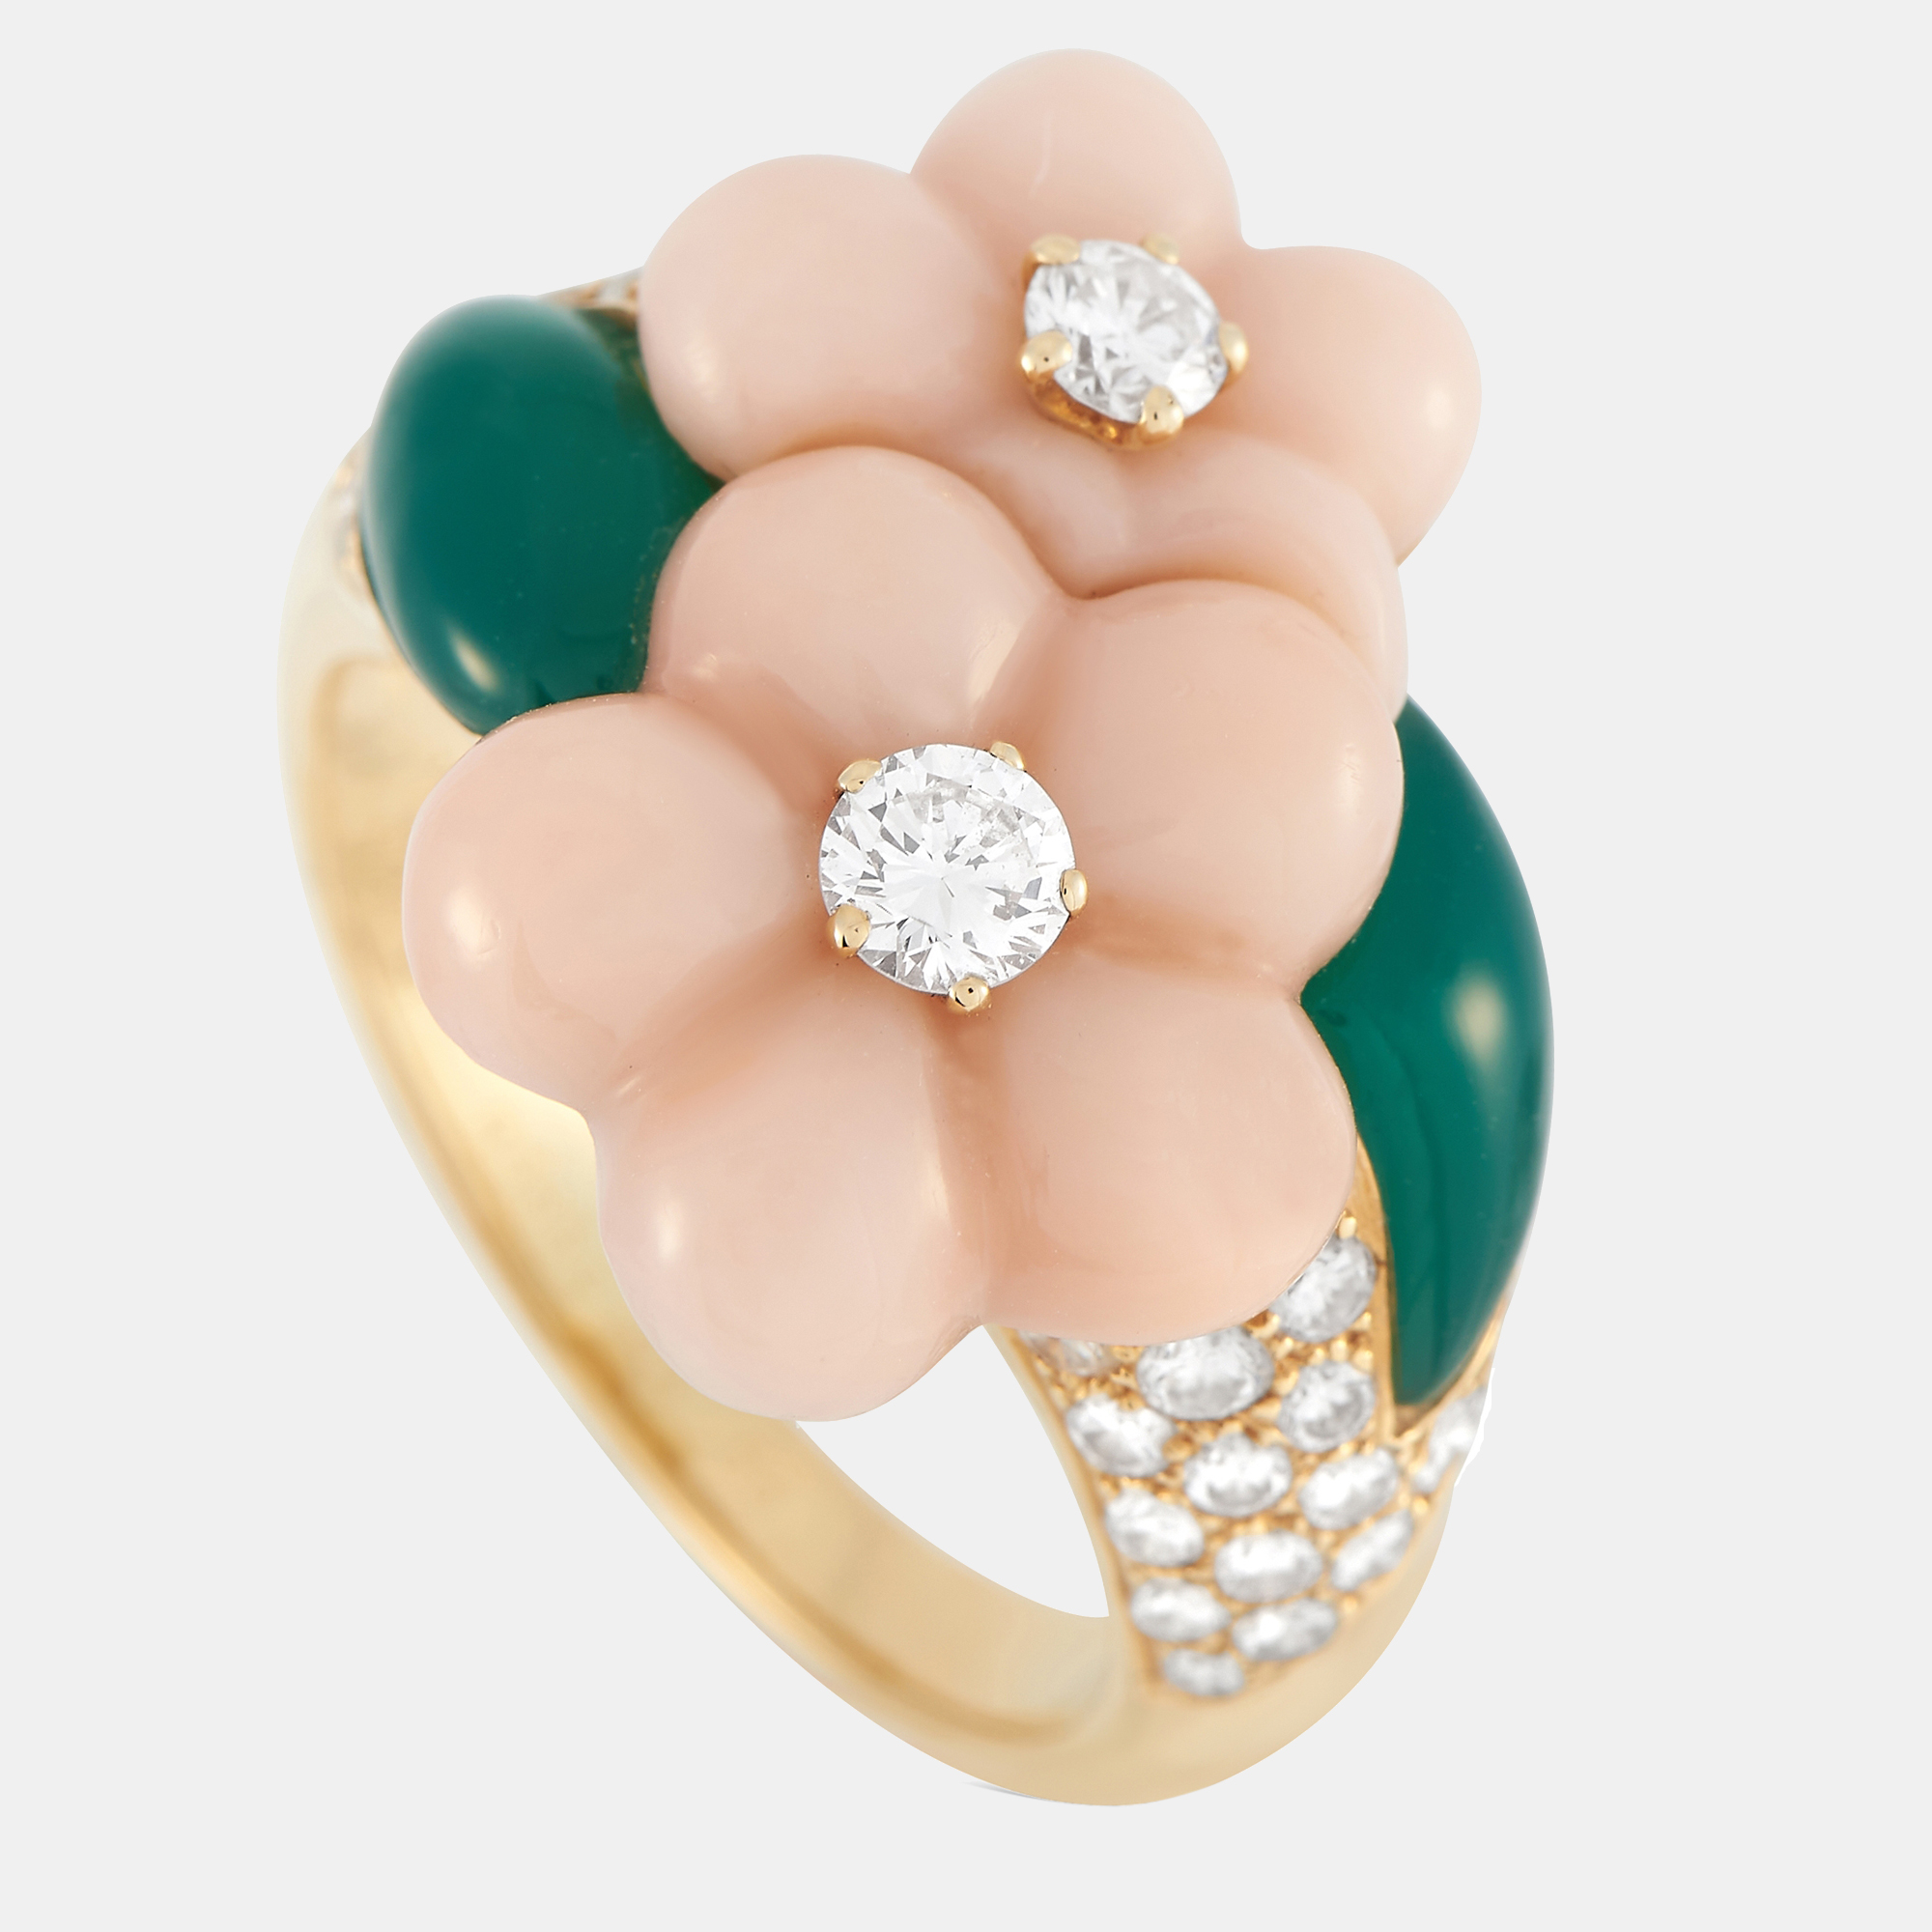 Van cleef  arpels 18k yellow gold 0.82 ct diamond, coral, and chrysoprase flower ring